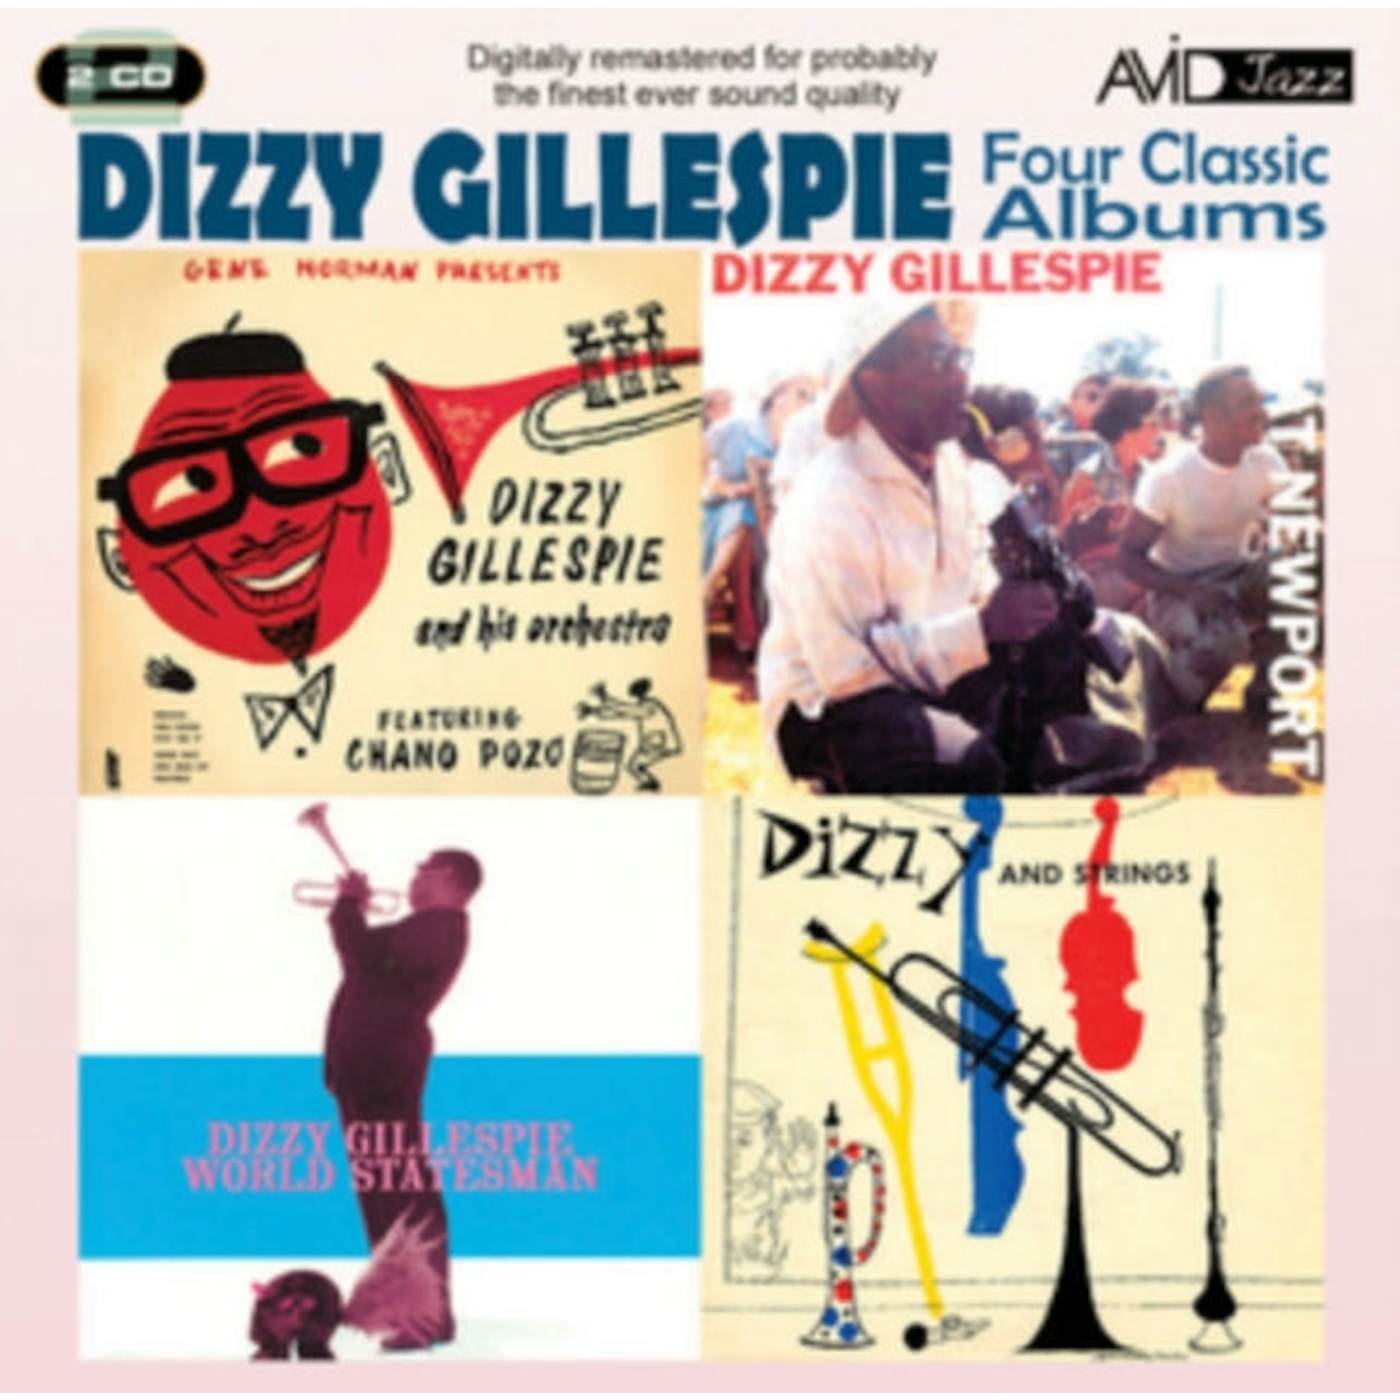 Dizzy Gillespie CD - Four Classic Albums (Dizzy Gillespie At Newport / Dizzy And Strings / Dizzy Gillespie World Statesman / Gene Norman Presents Dizzy Gillespie And His Orchestra)